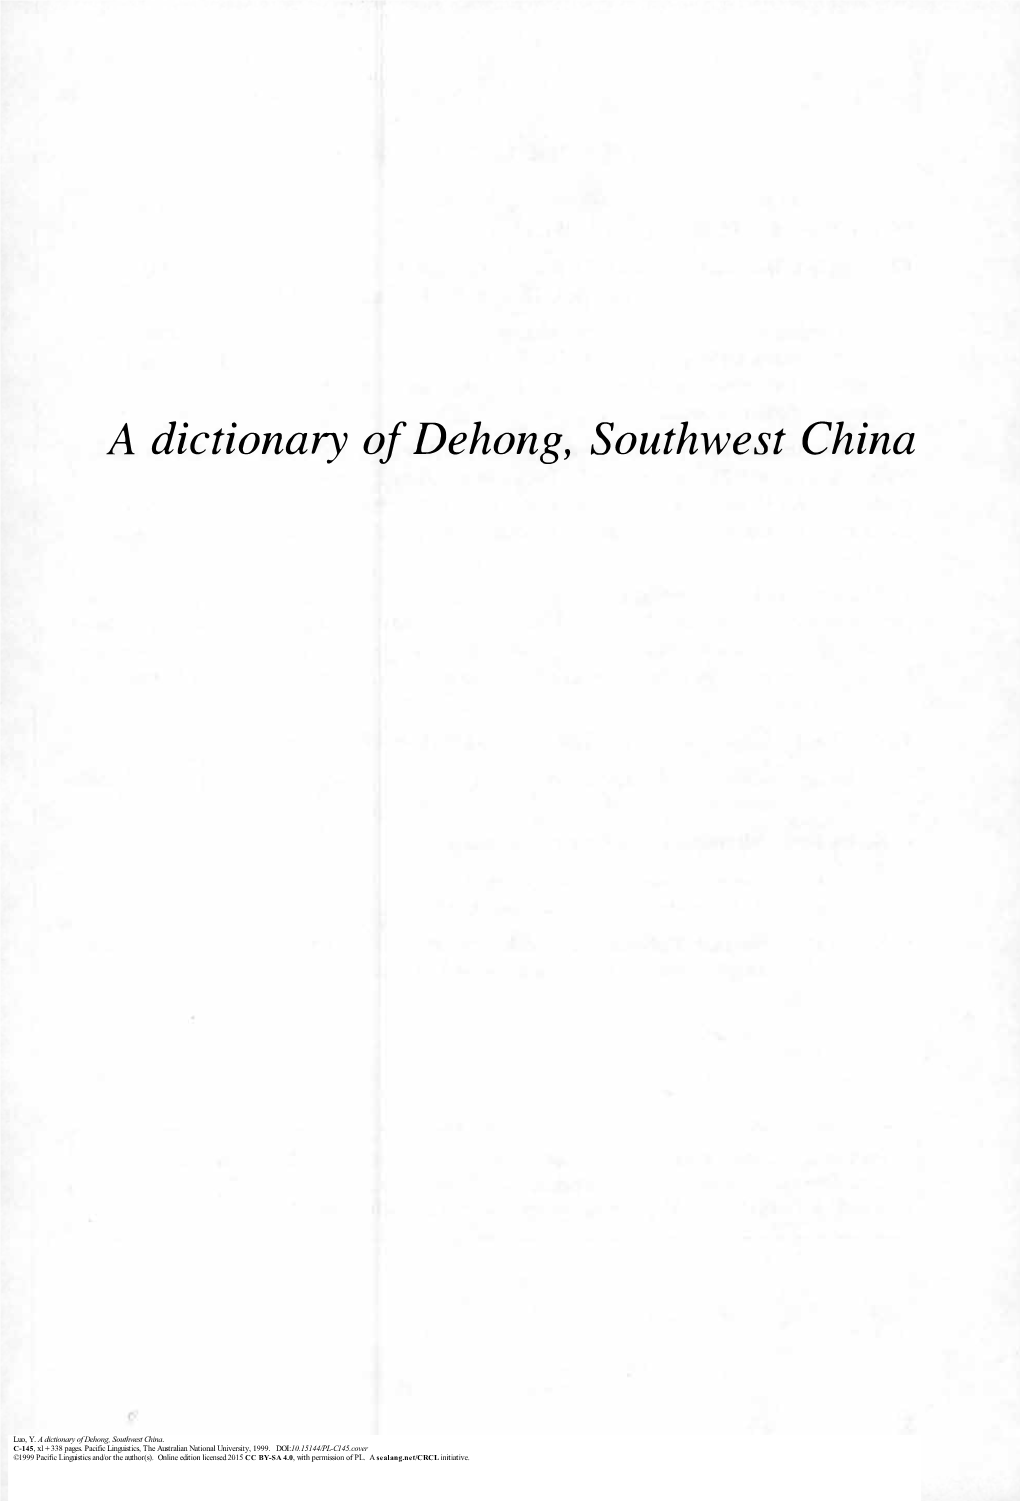 A Dictionary of Dehong, Southwest China